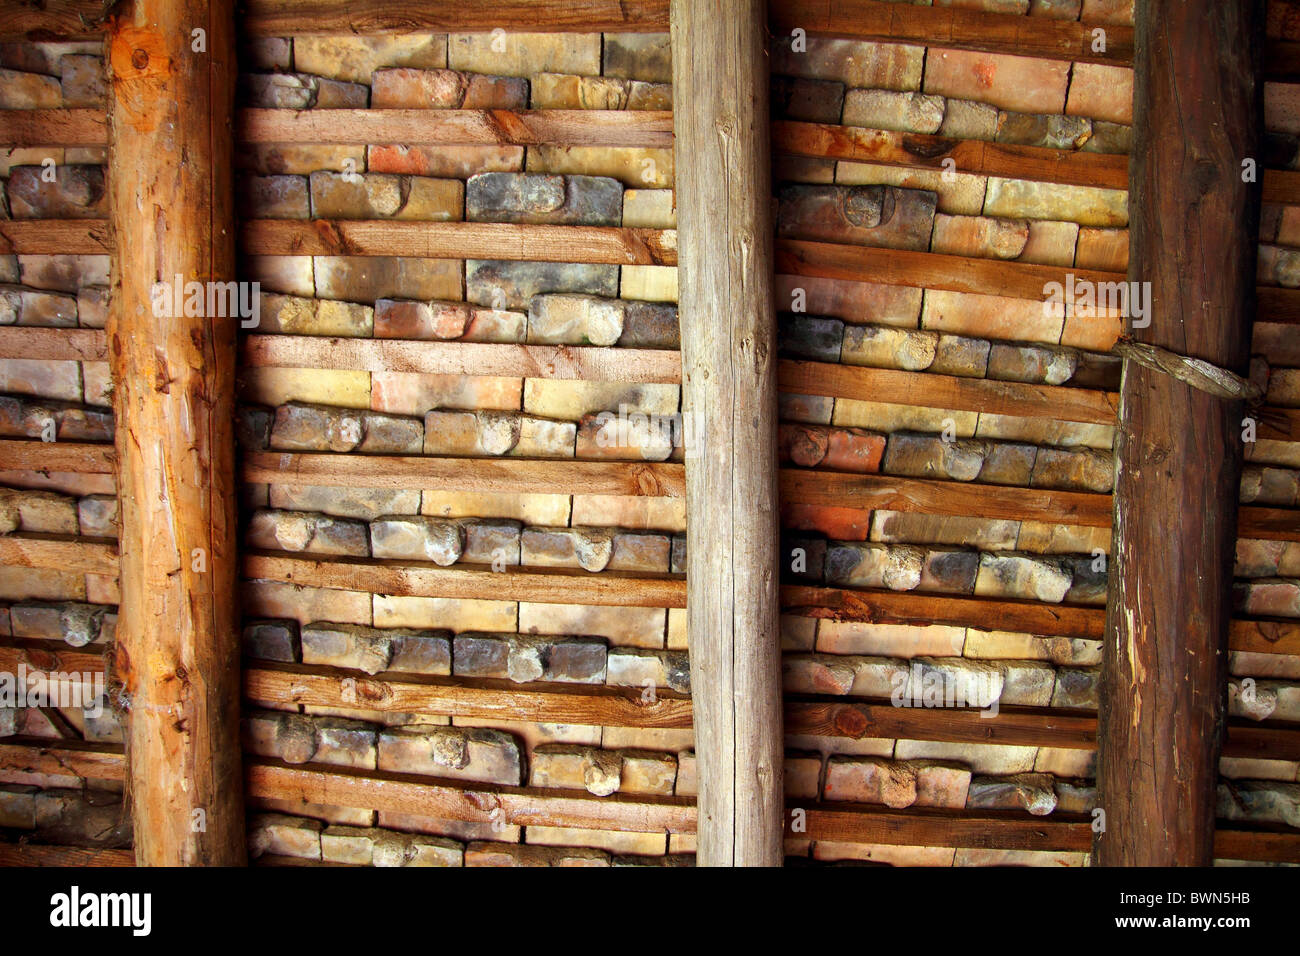 Clay square roof tiles ceiling indoor wooden beams view in Pyrenees Stock Photo